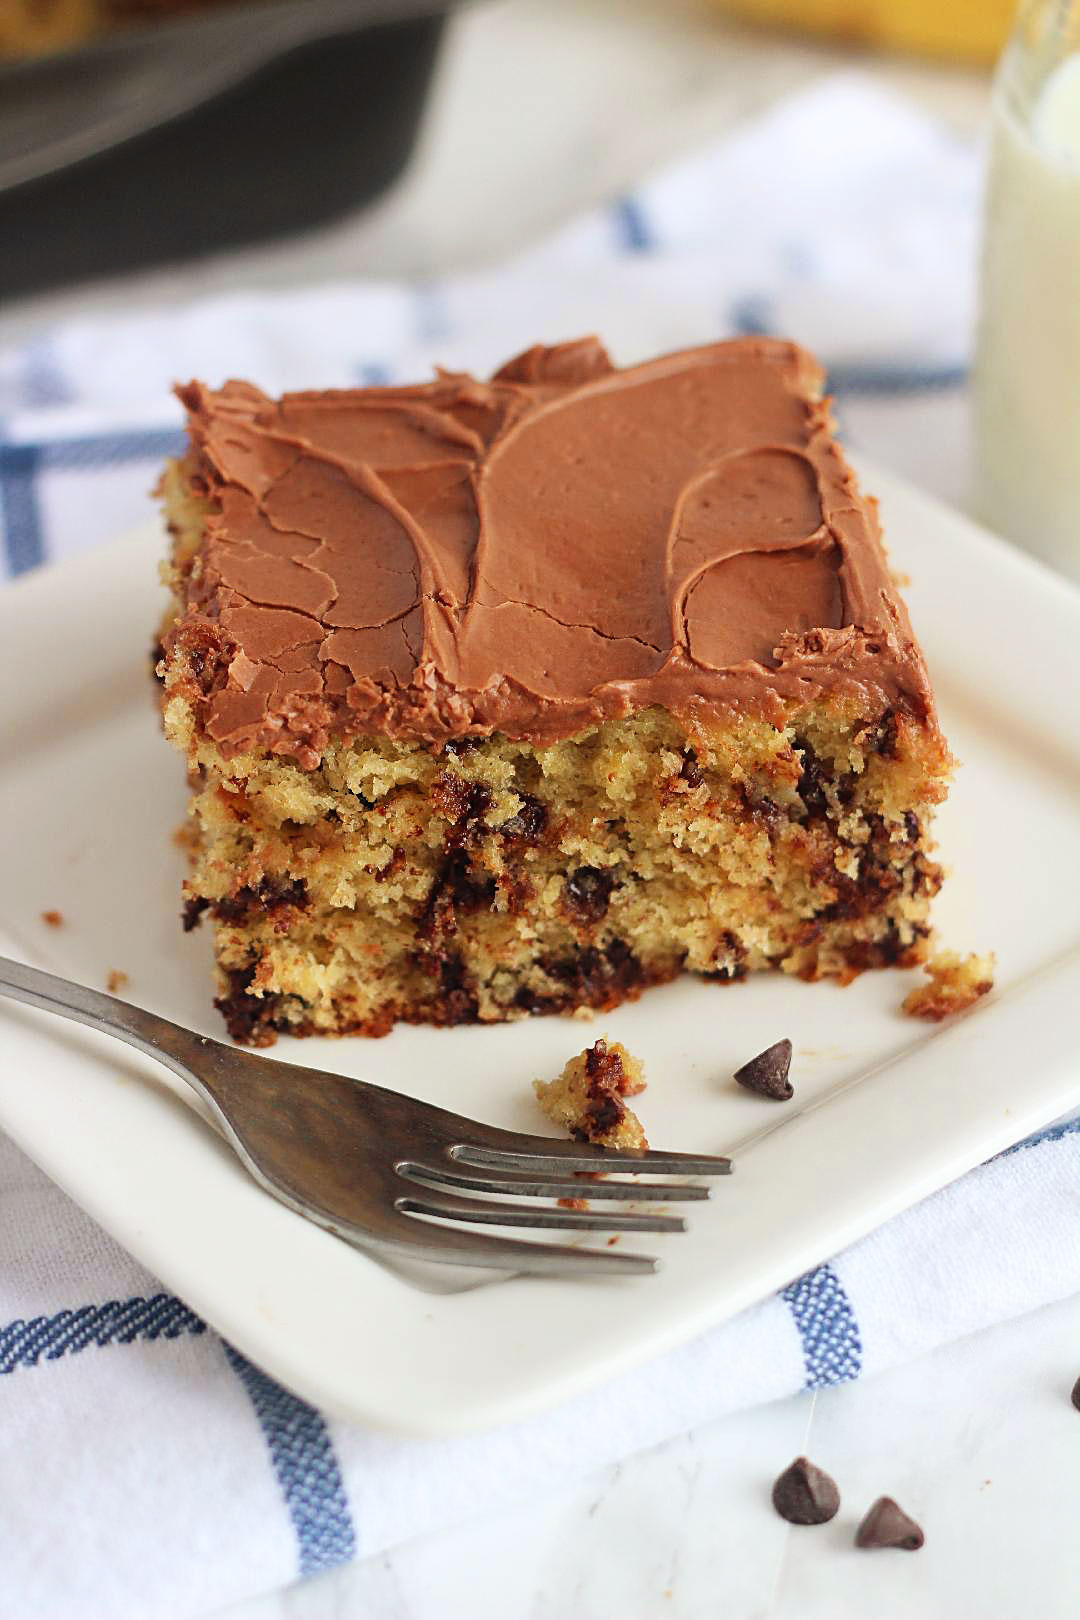 Chocolate Chip Banana Cake is a delicious, soft banana cake filled with chocolate chips and topped with a creamy chocolate frosting. Life-in-the-Lofthouse.com